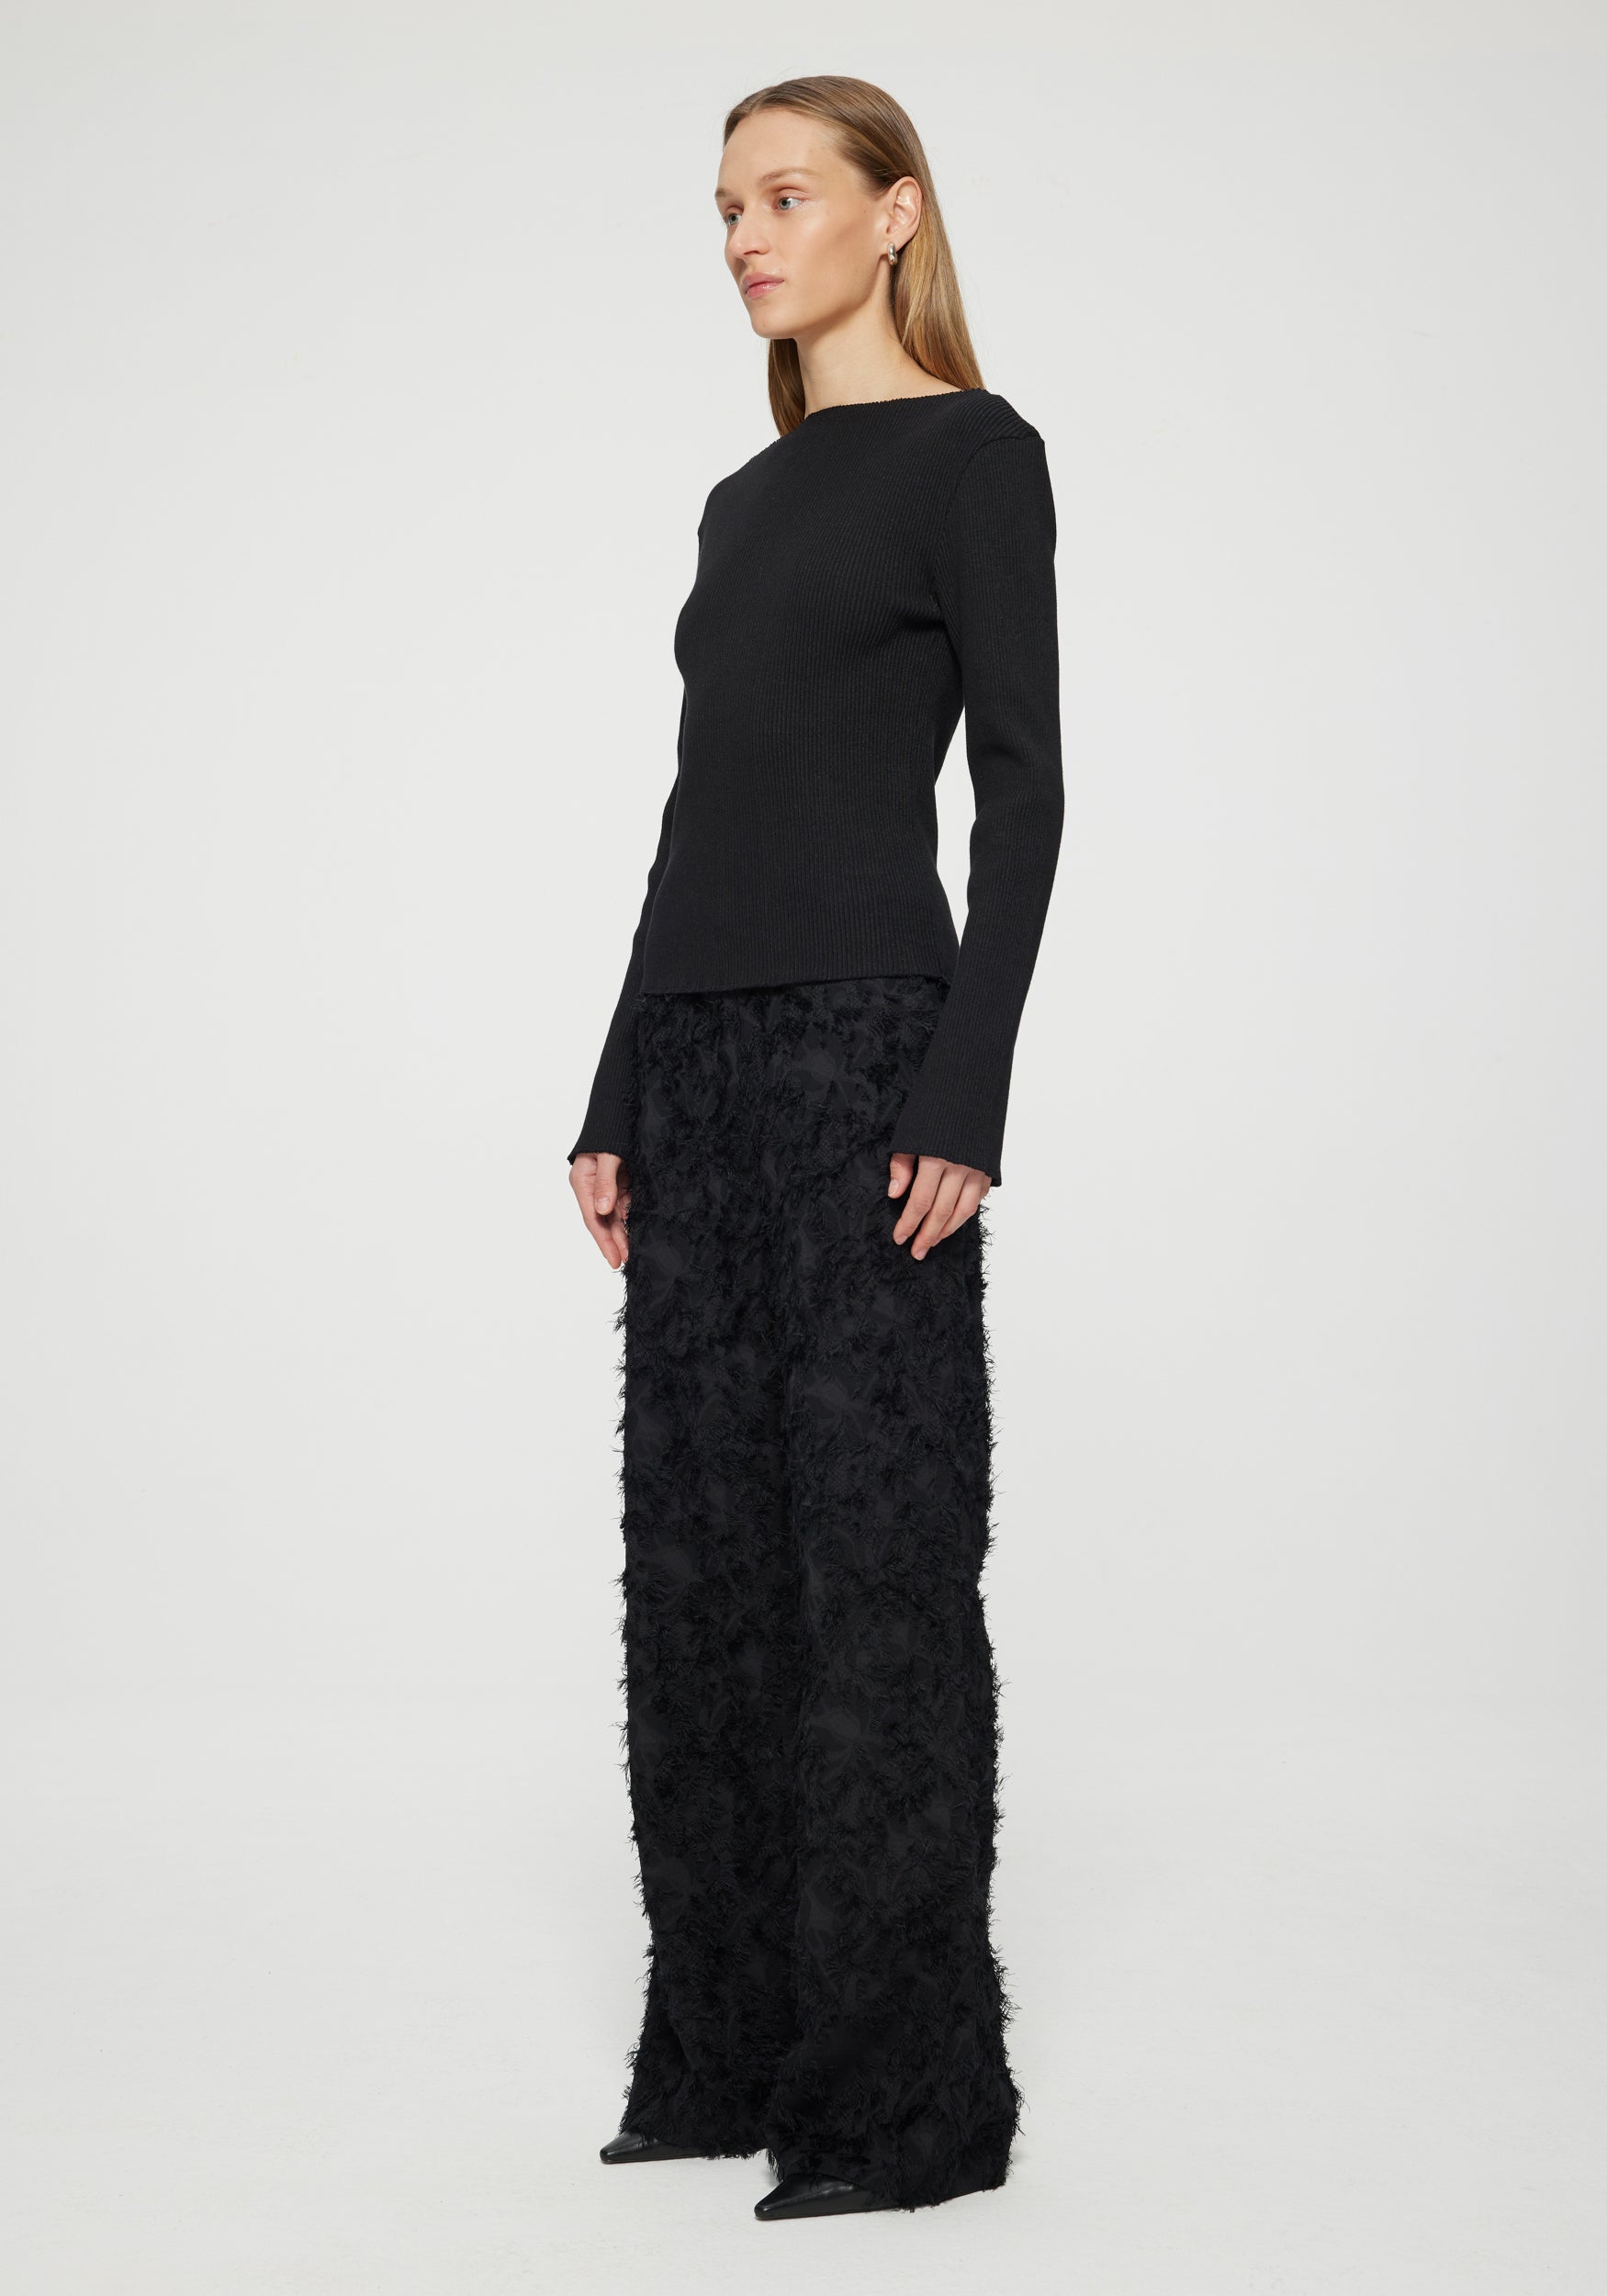 Rohe Ribbed Knit Top in Noir available at TNT The New Trend Australia